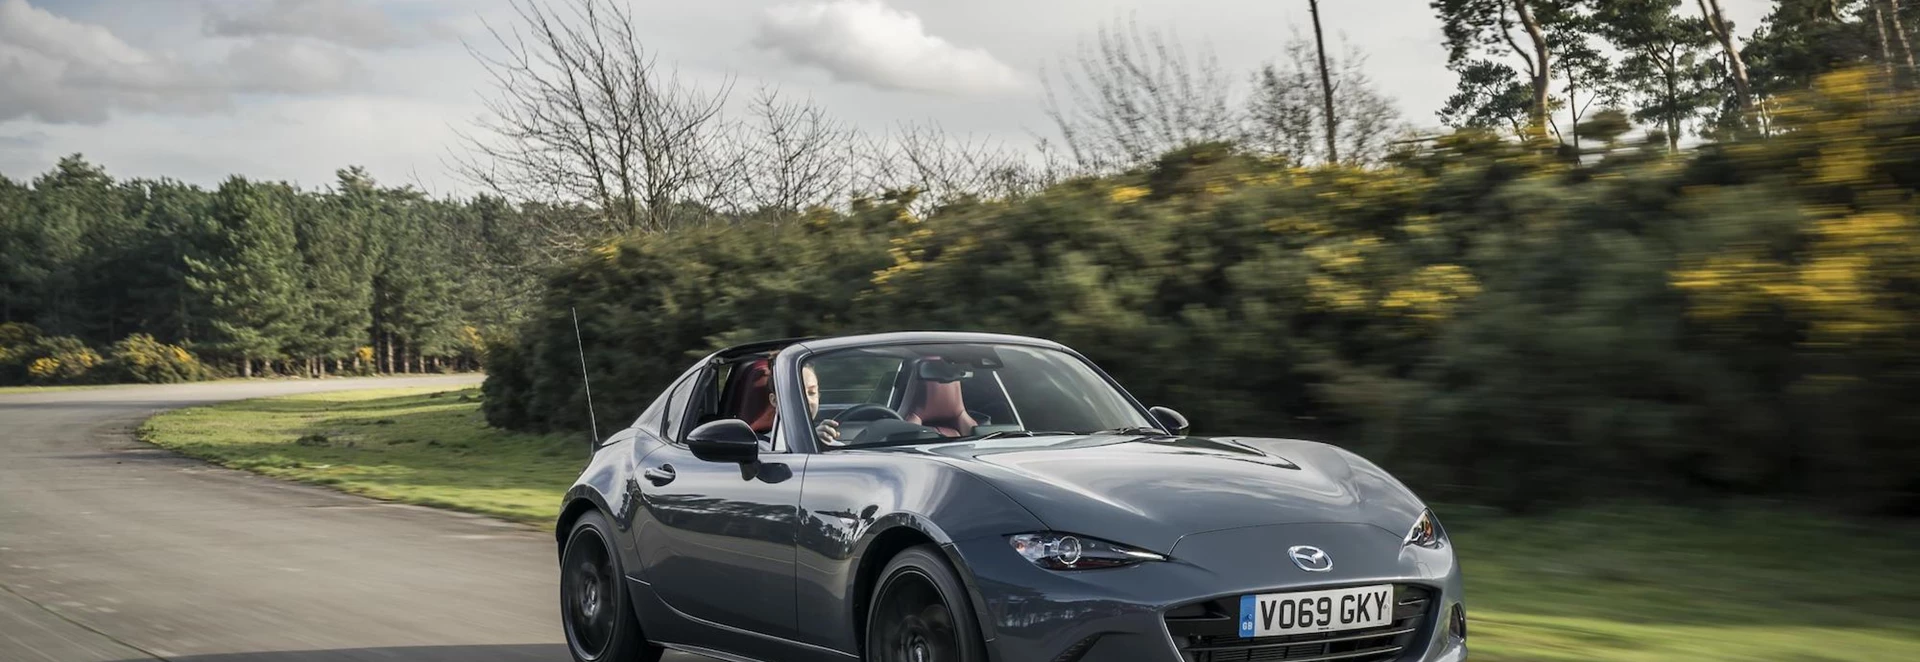 2020 Mazda MX-5 GT Sport Tech now available to order